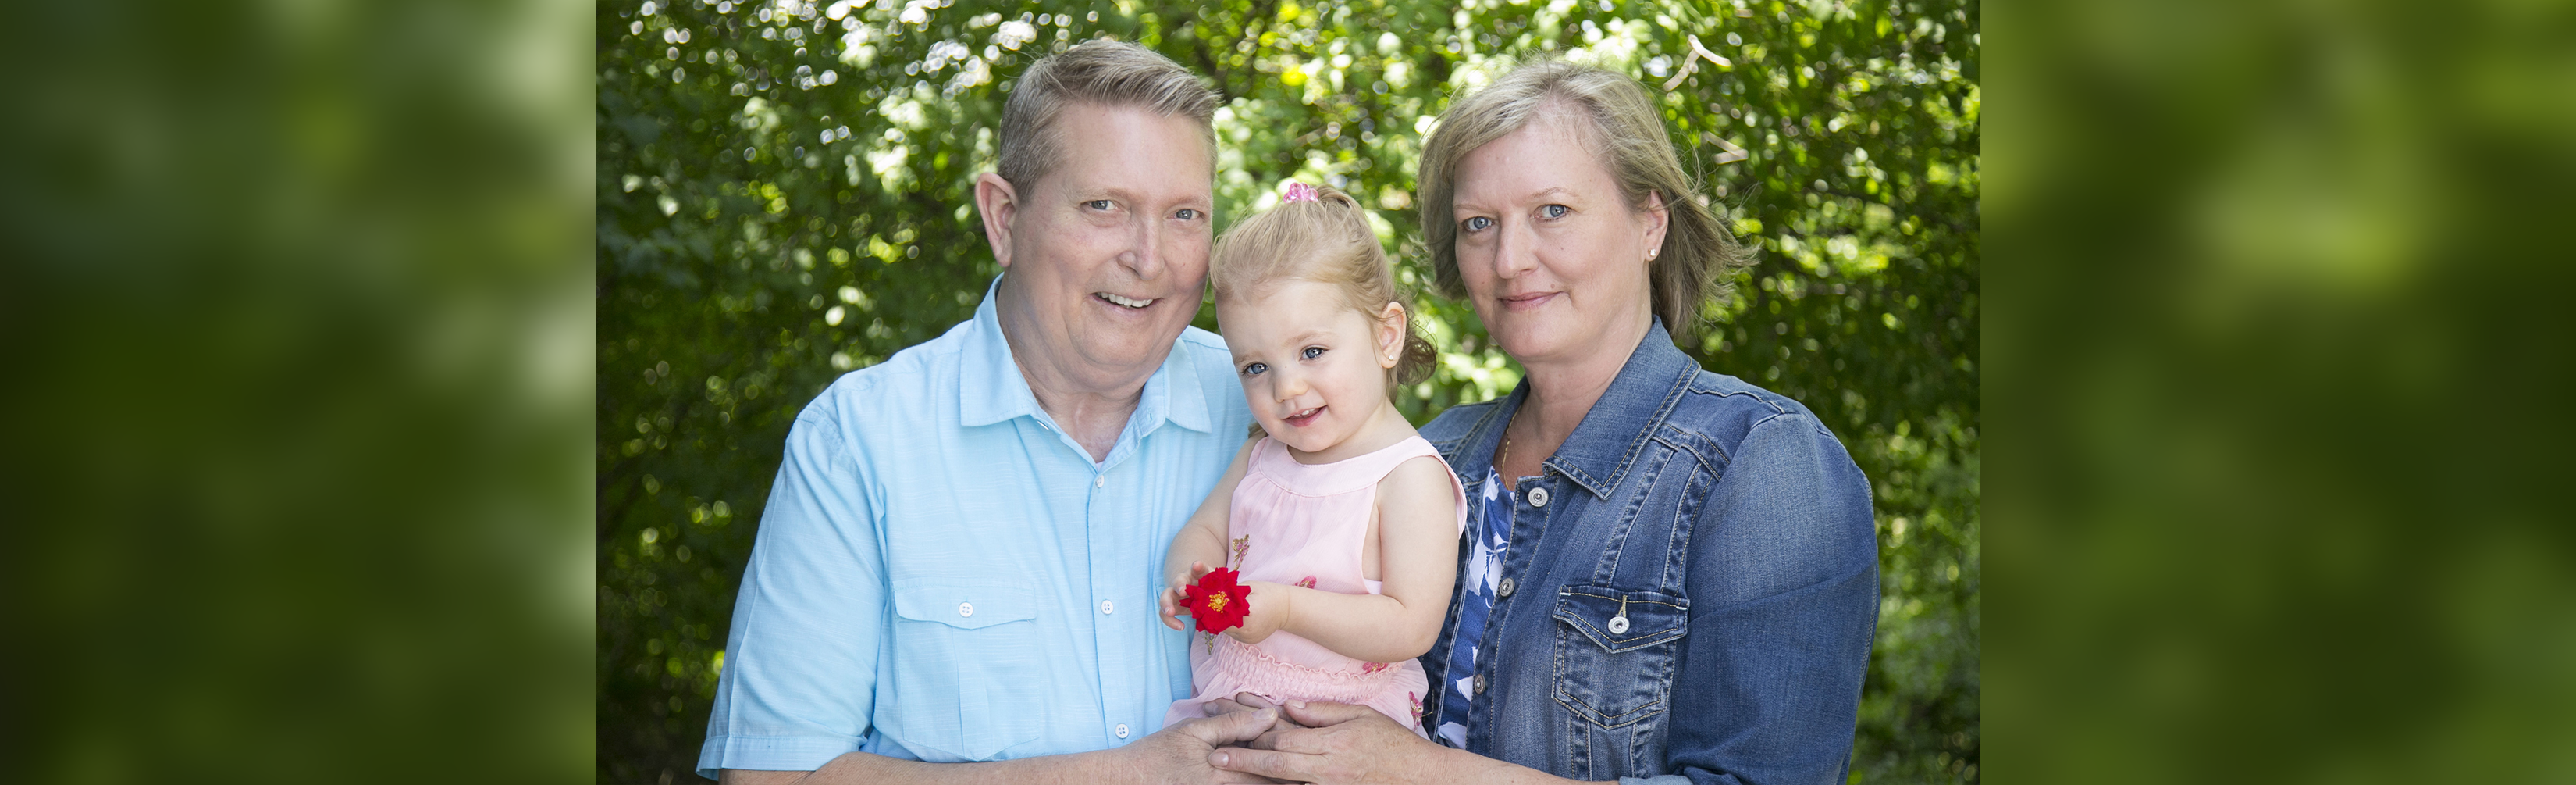 Duane and Dana Cerniglia with their 4-year-old granddaughter, Remy